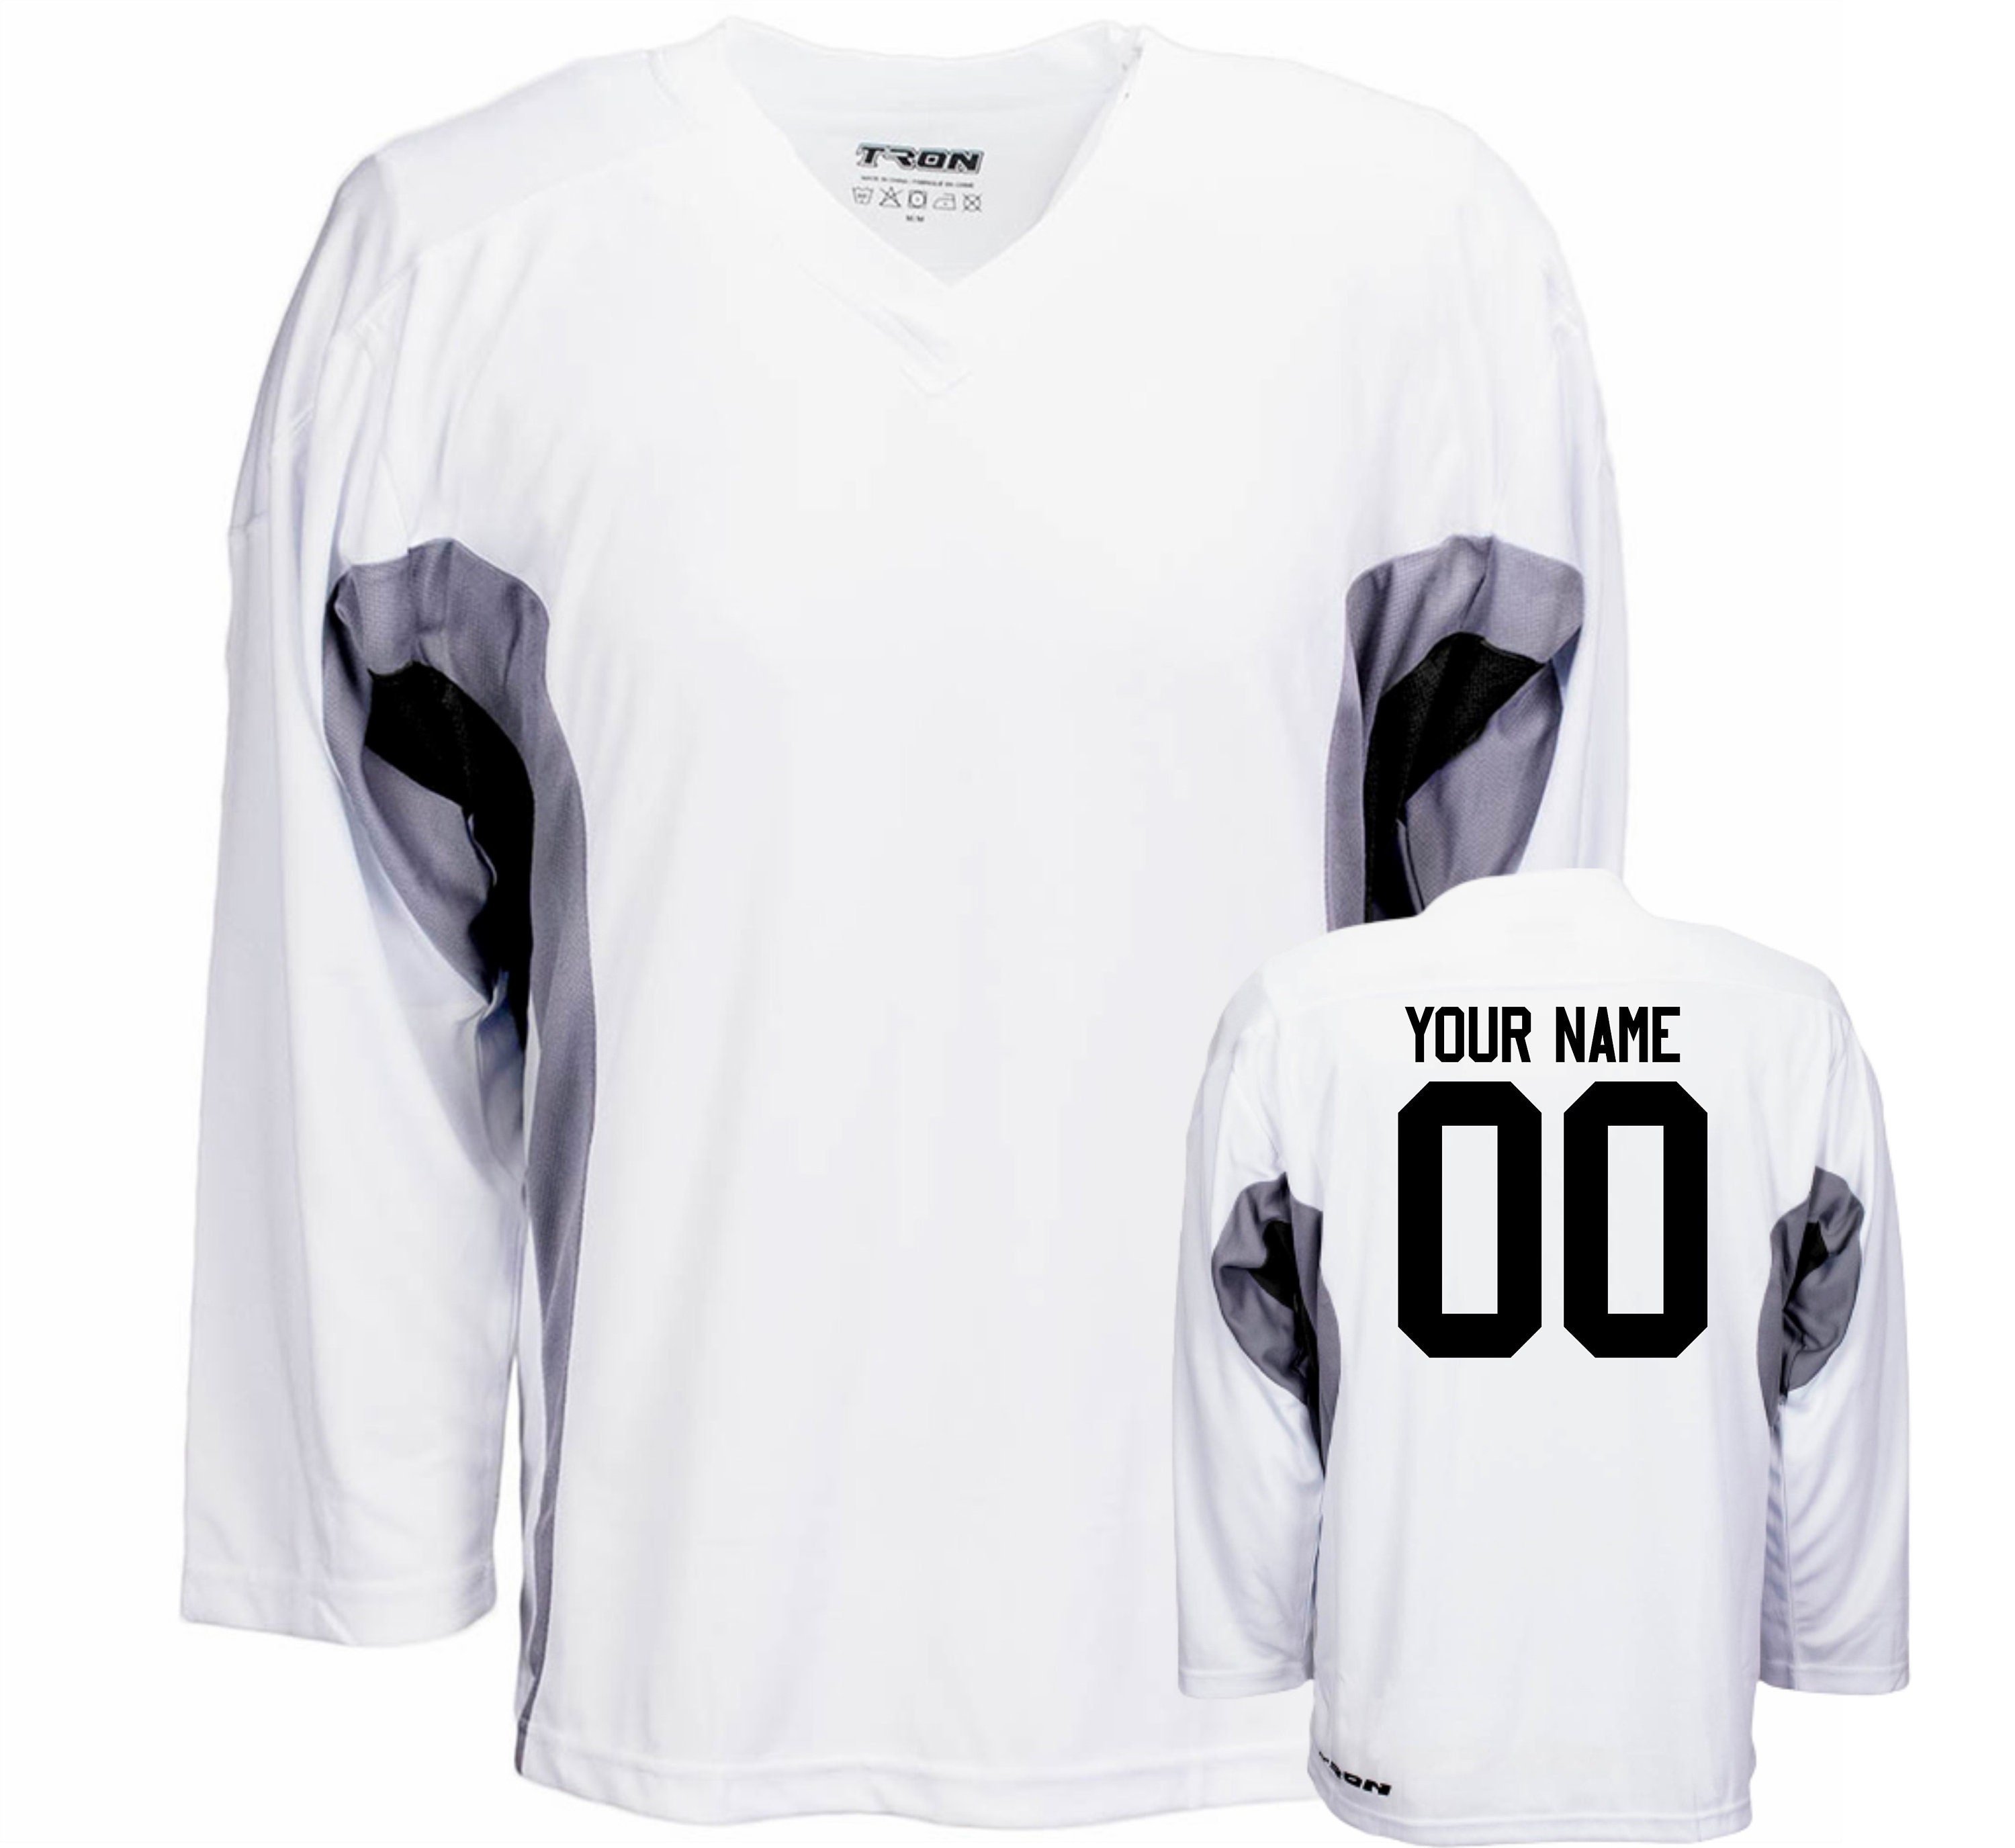 Custom Hockey Jerseys - Solid Body Alternating Waist and Sleeve Stripes - Team Name, Player Name and Numbers on Sleeves - Team Designation